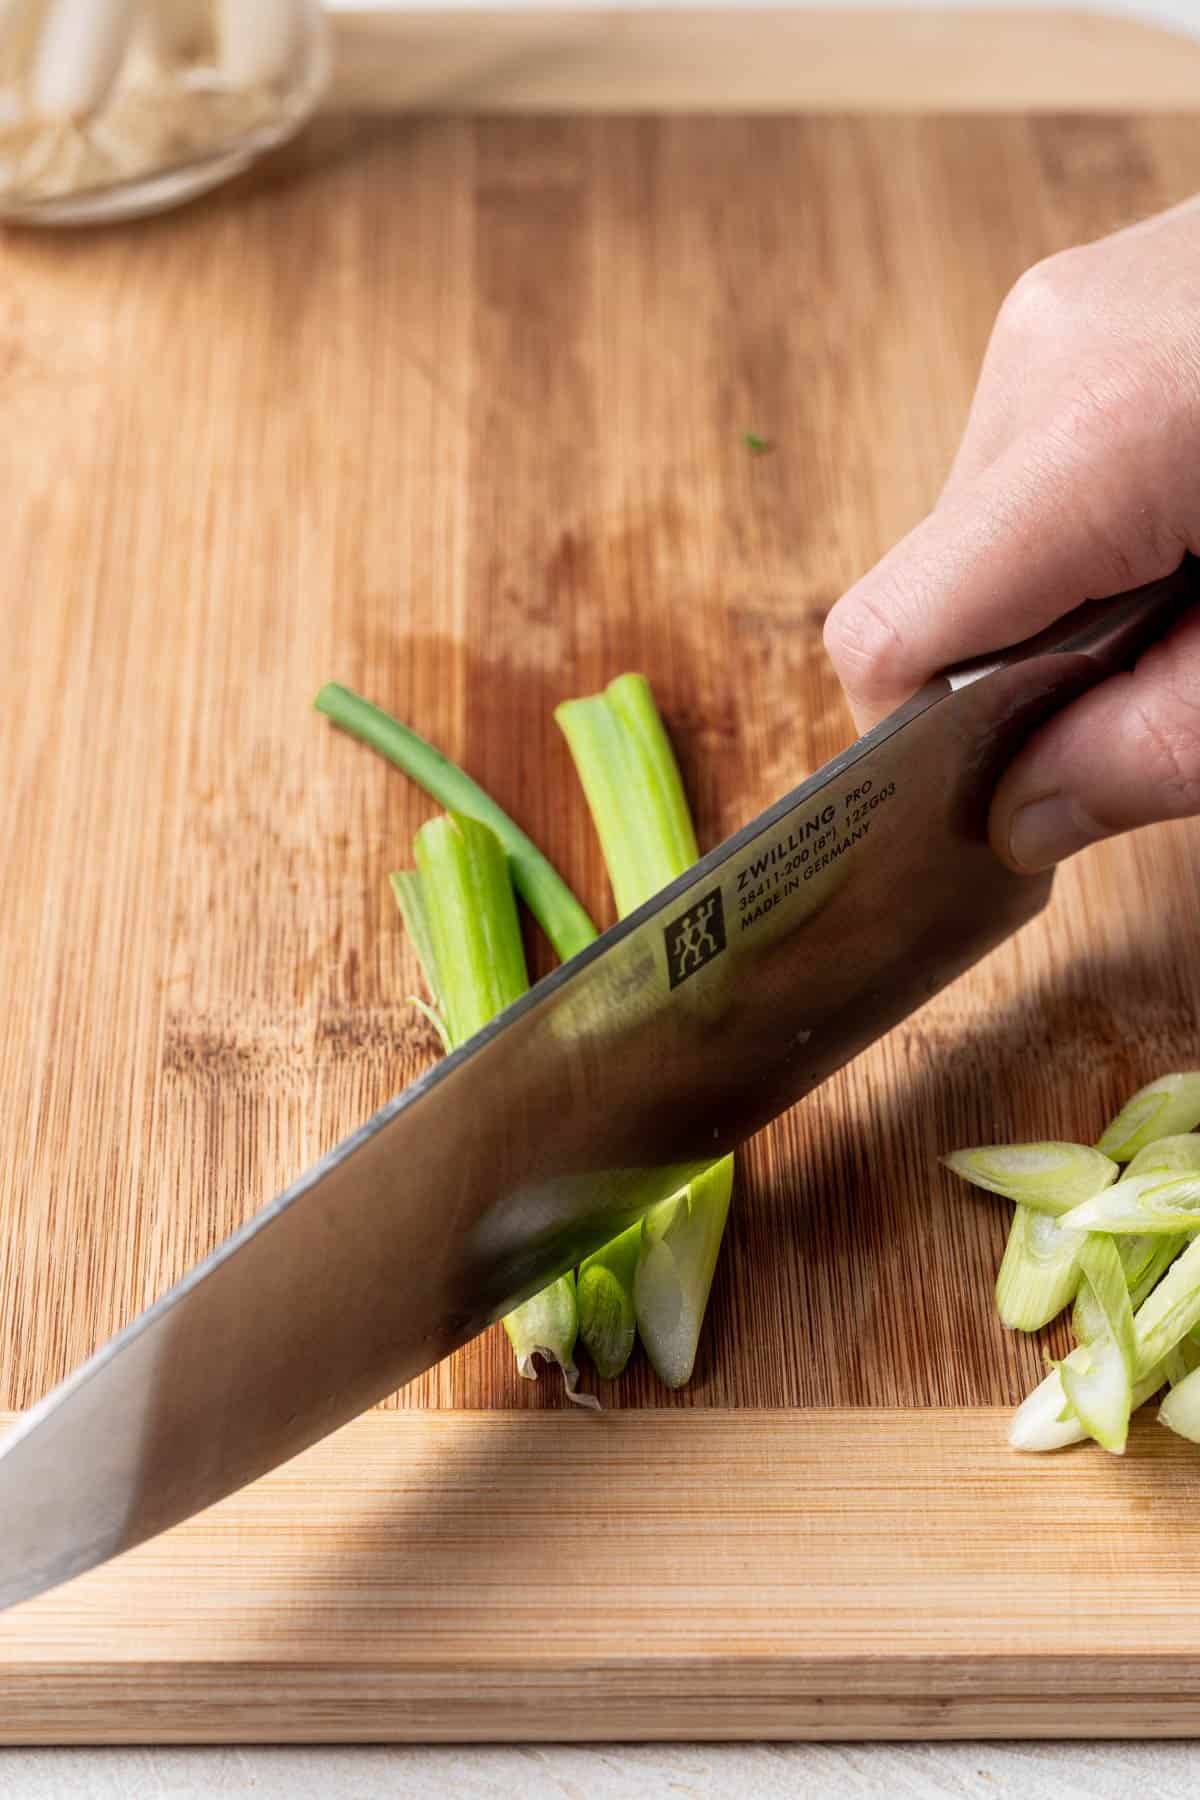 A knife slicing green onion on a bias.